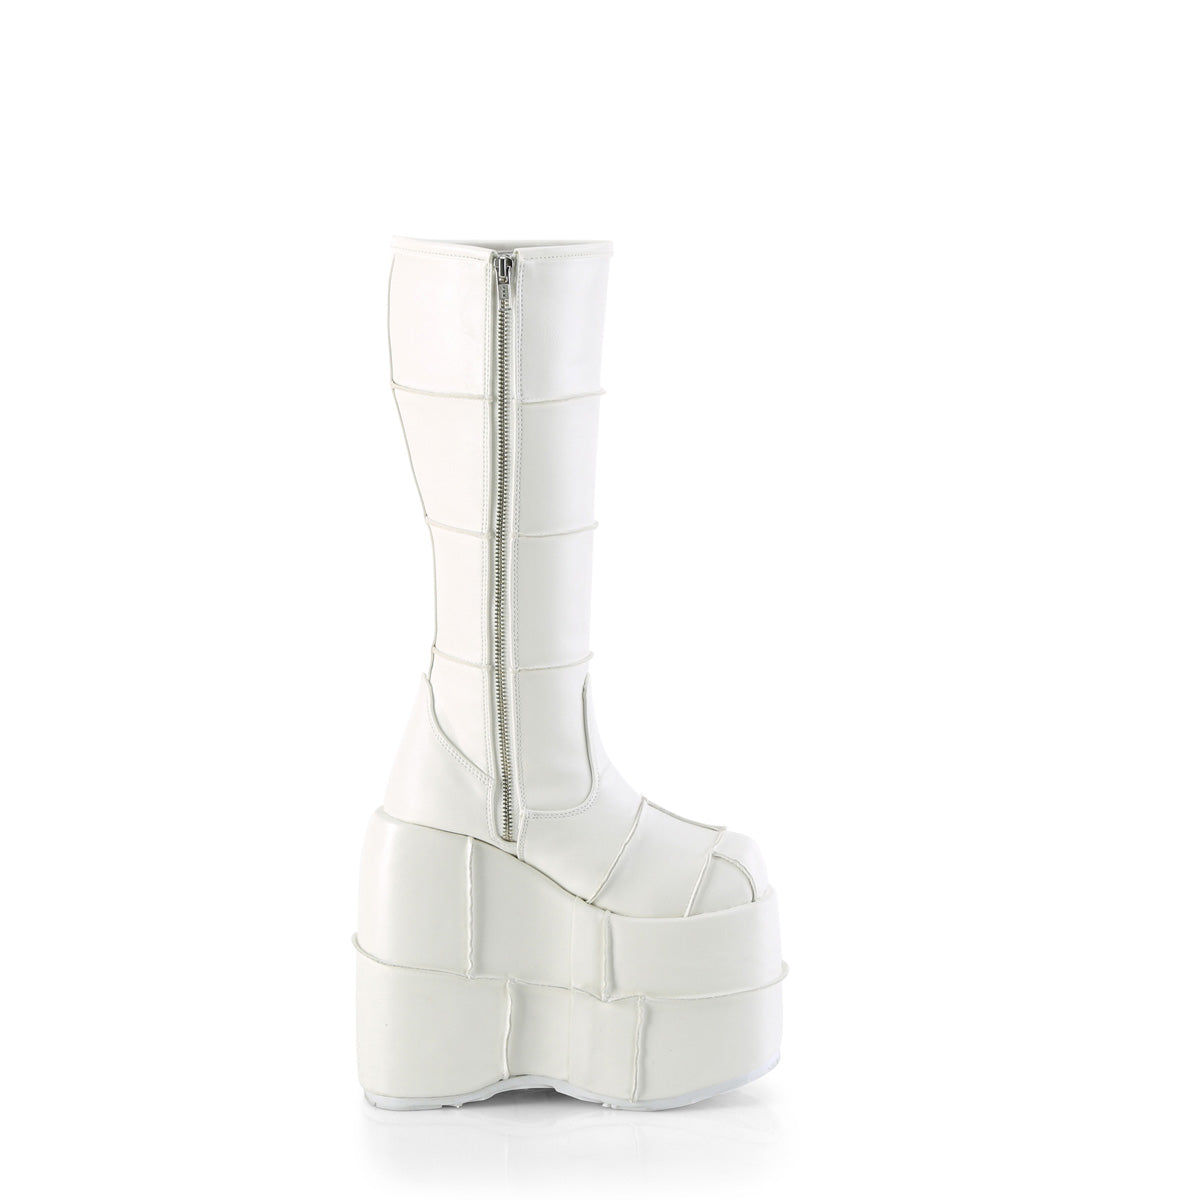 DemoniaCult Mens Boots STACK-301 Wht Vegan Leather